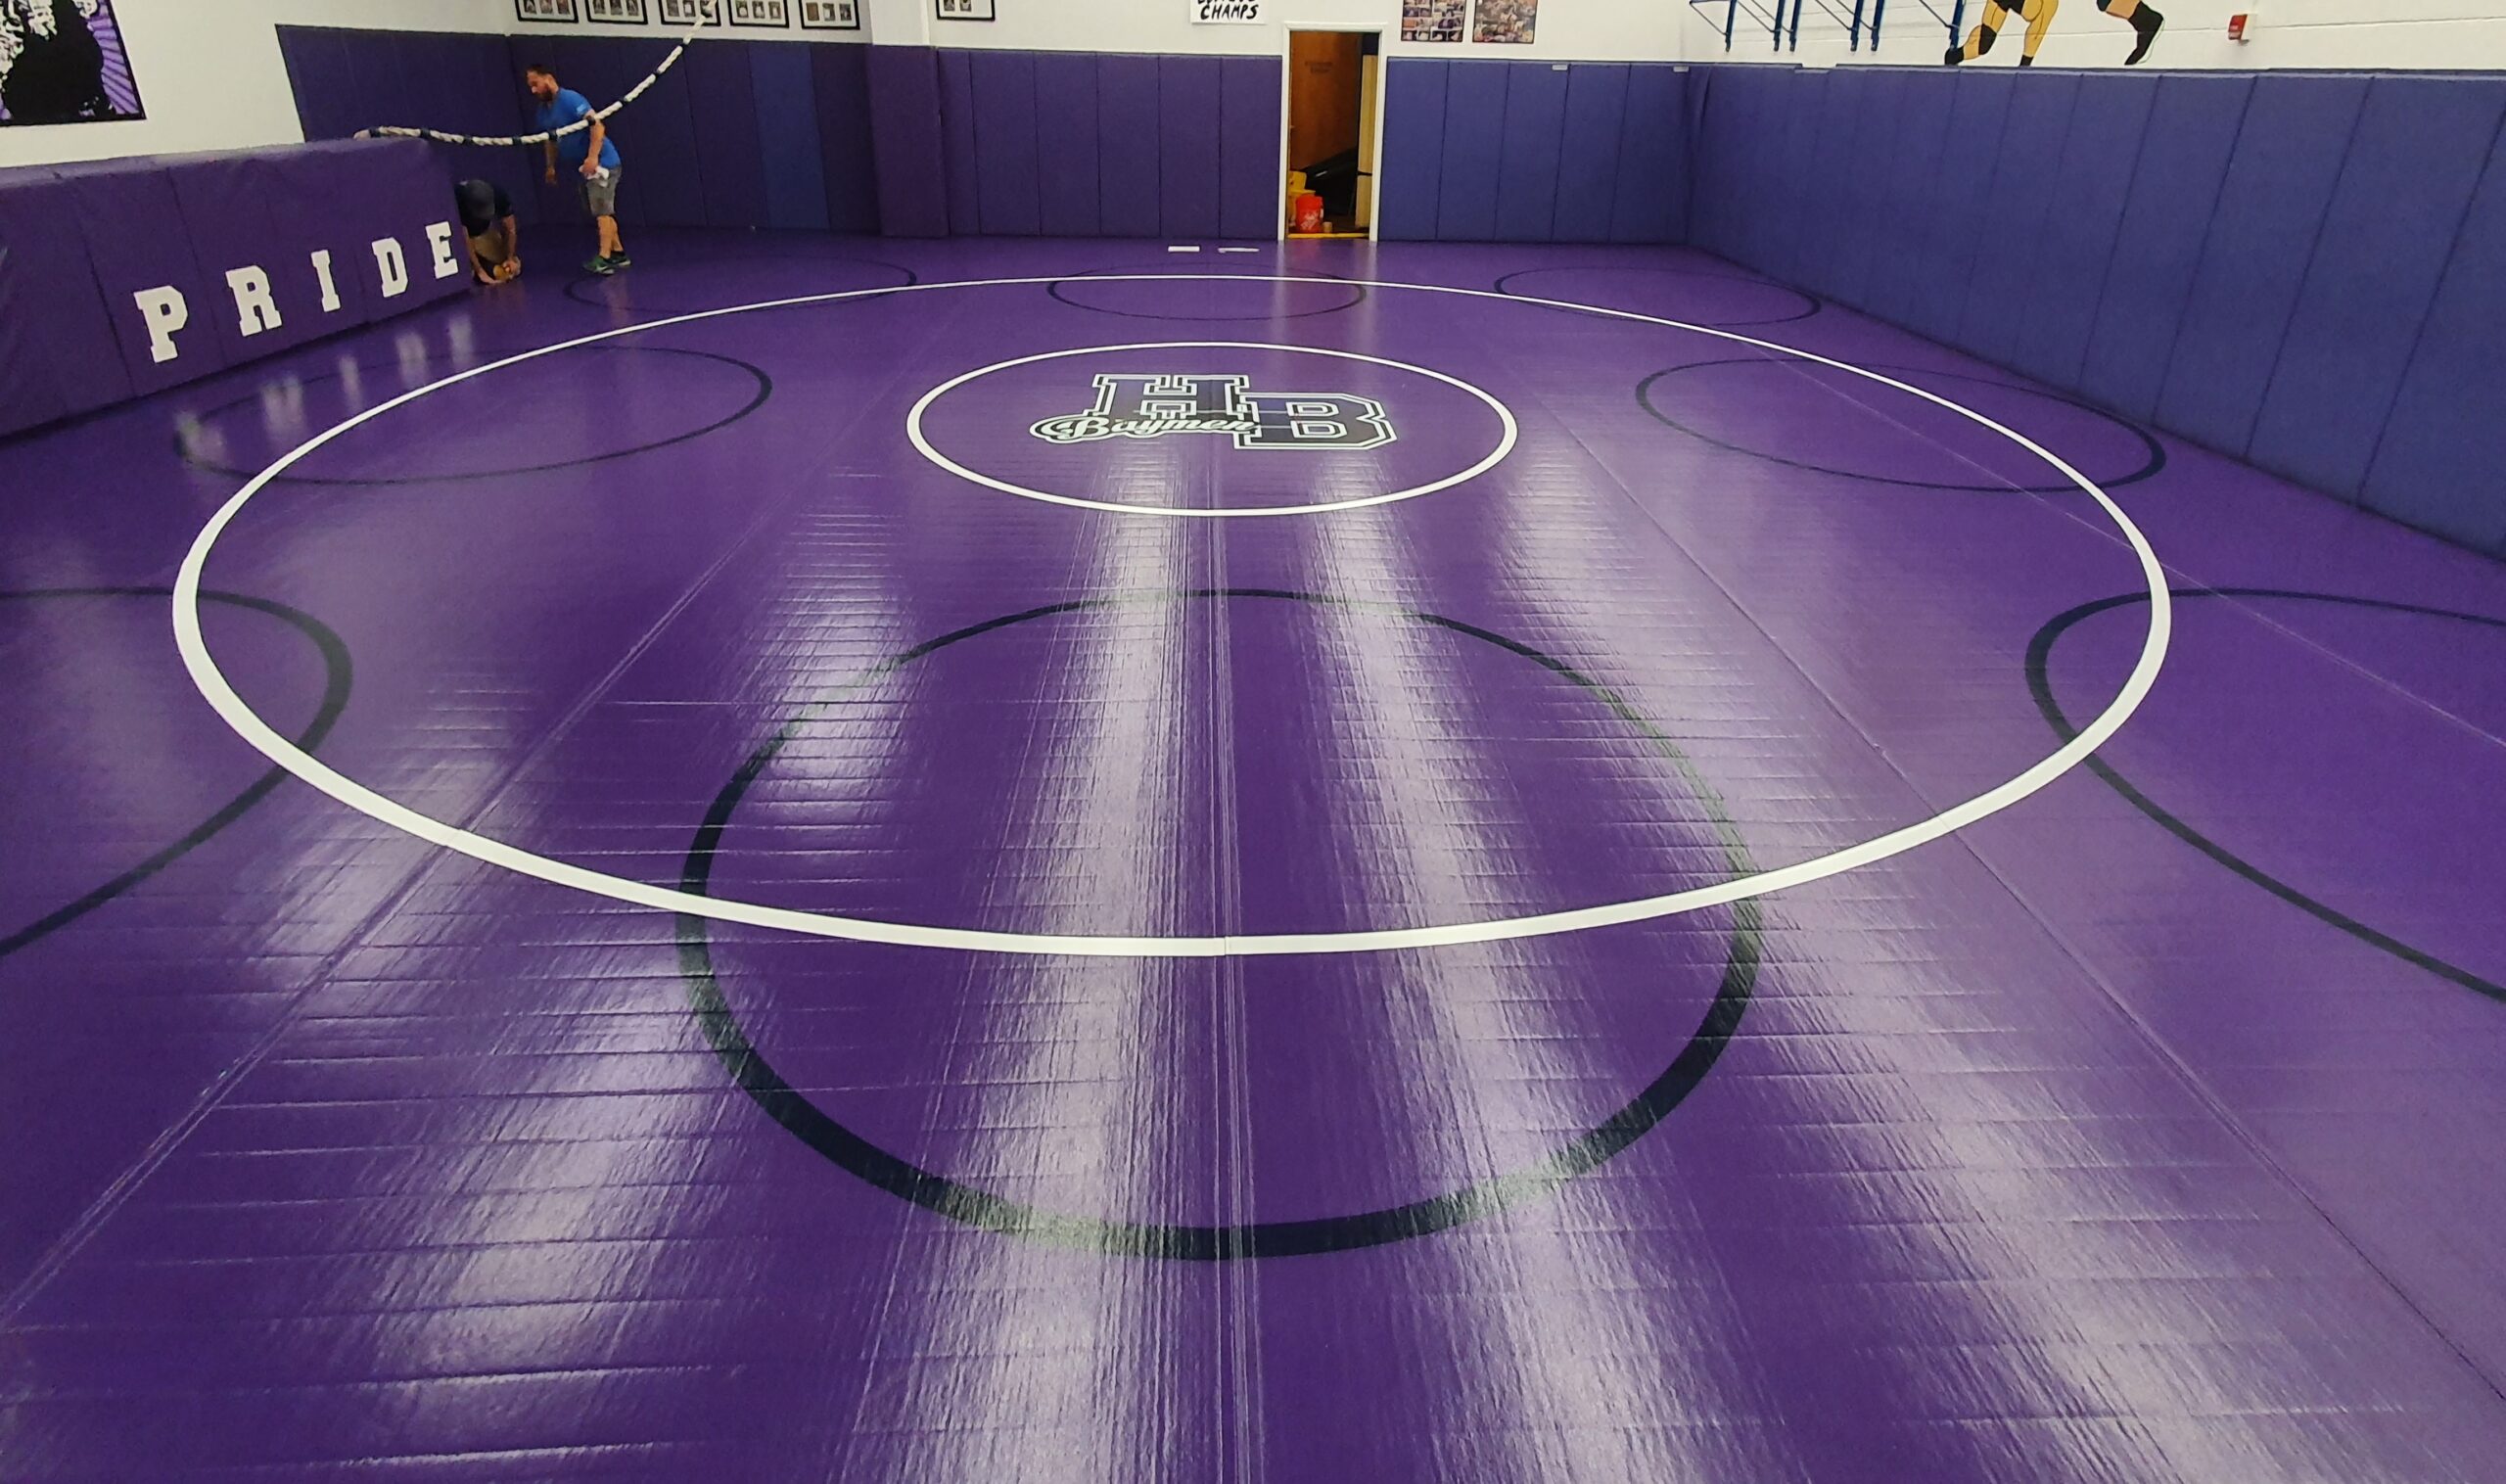 Hampton Bays head coach Mike Lloyd, his coaching staff and wrestlers are excited about the support they’ve received from the school and athletic director John Foster in procuring a new set of practice mats for the team's wrestling room.